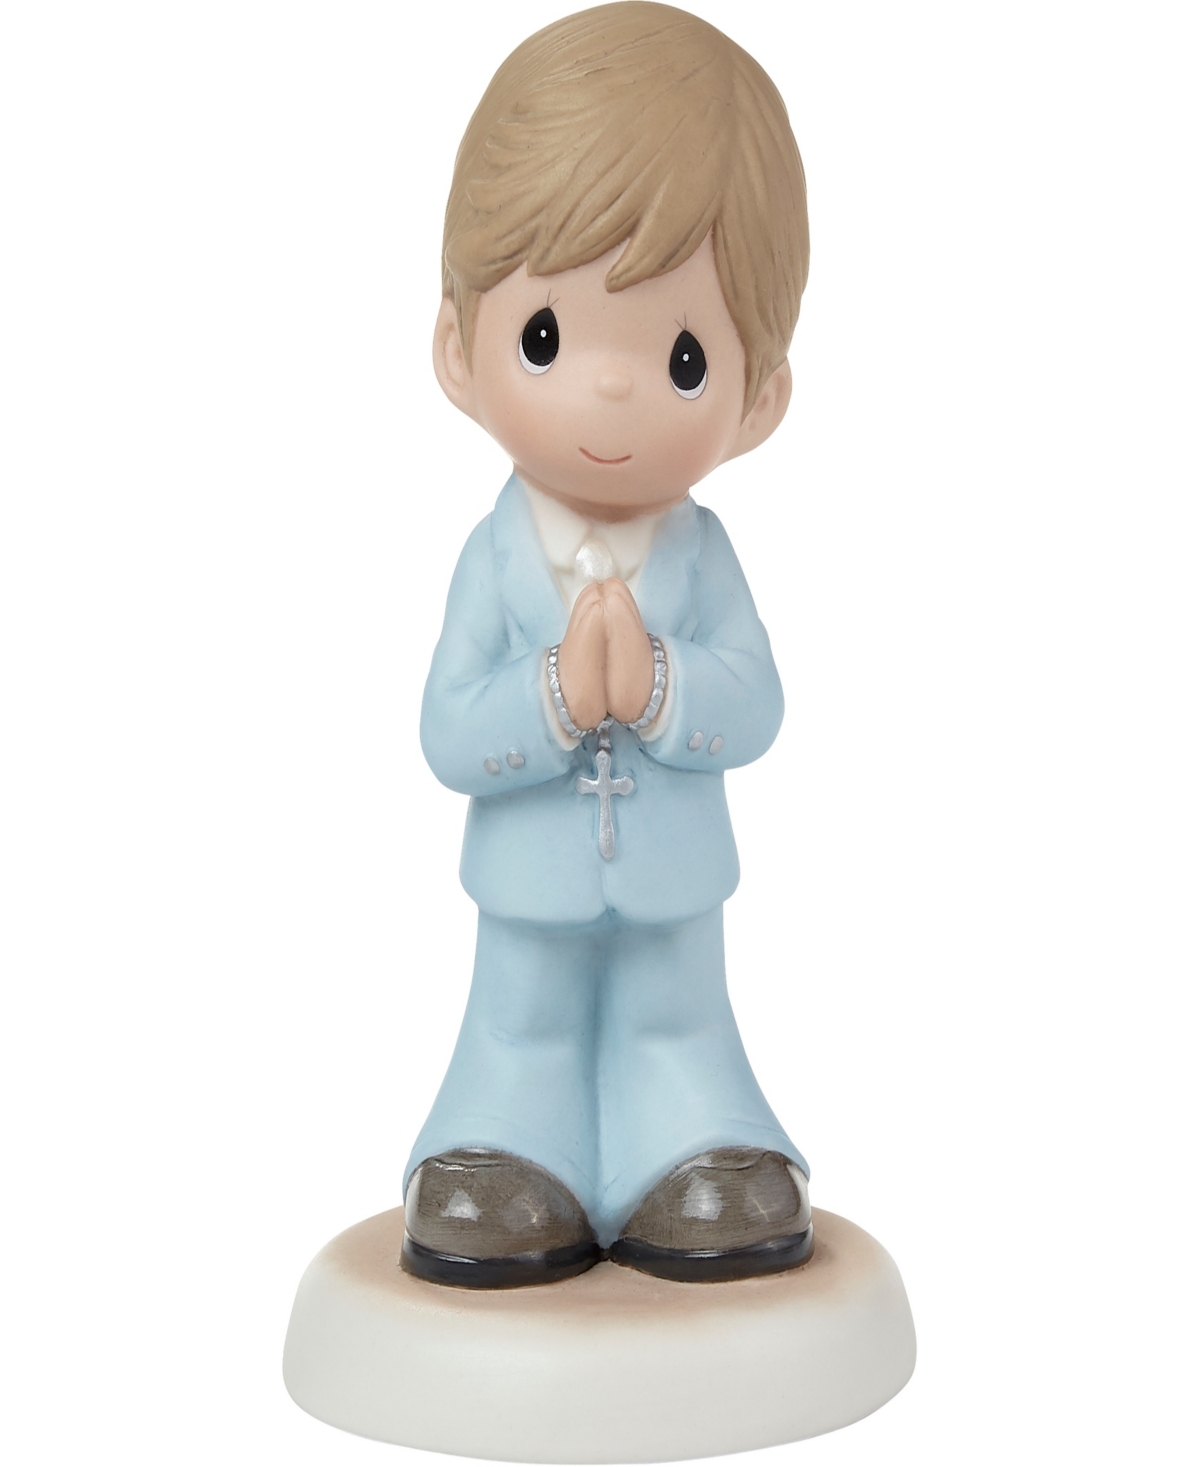 Precious Moments 222022e Blessings On Your First Communion Brunette Hair And Medium Skin Boy Bisque Porcelain Figurin In Multicolored